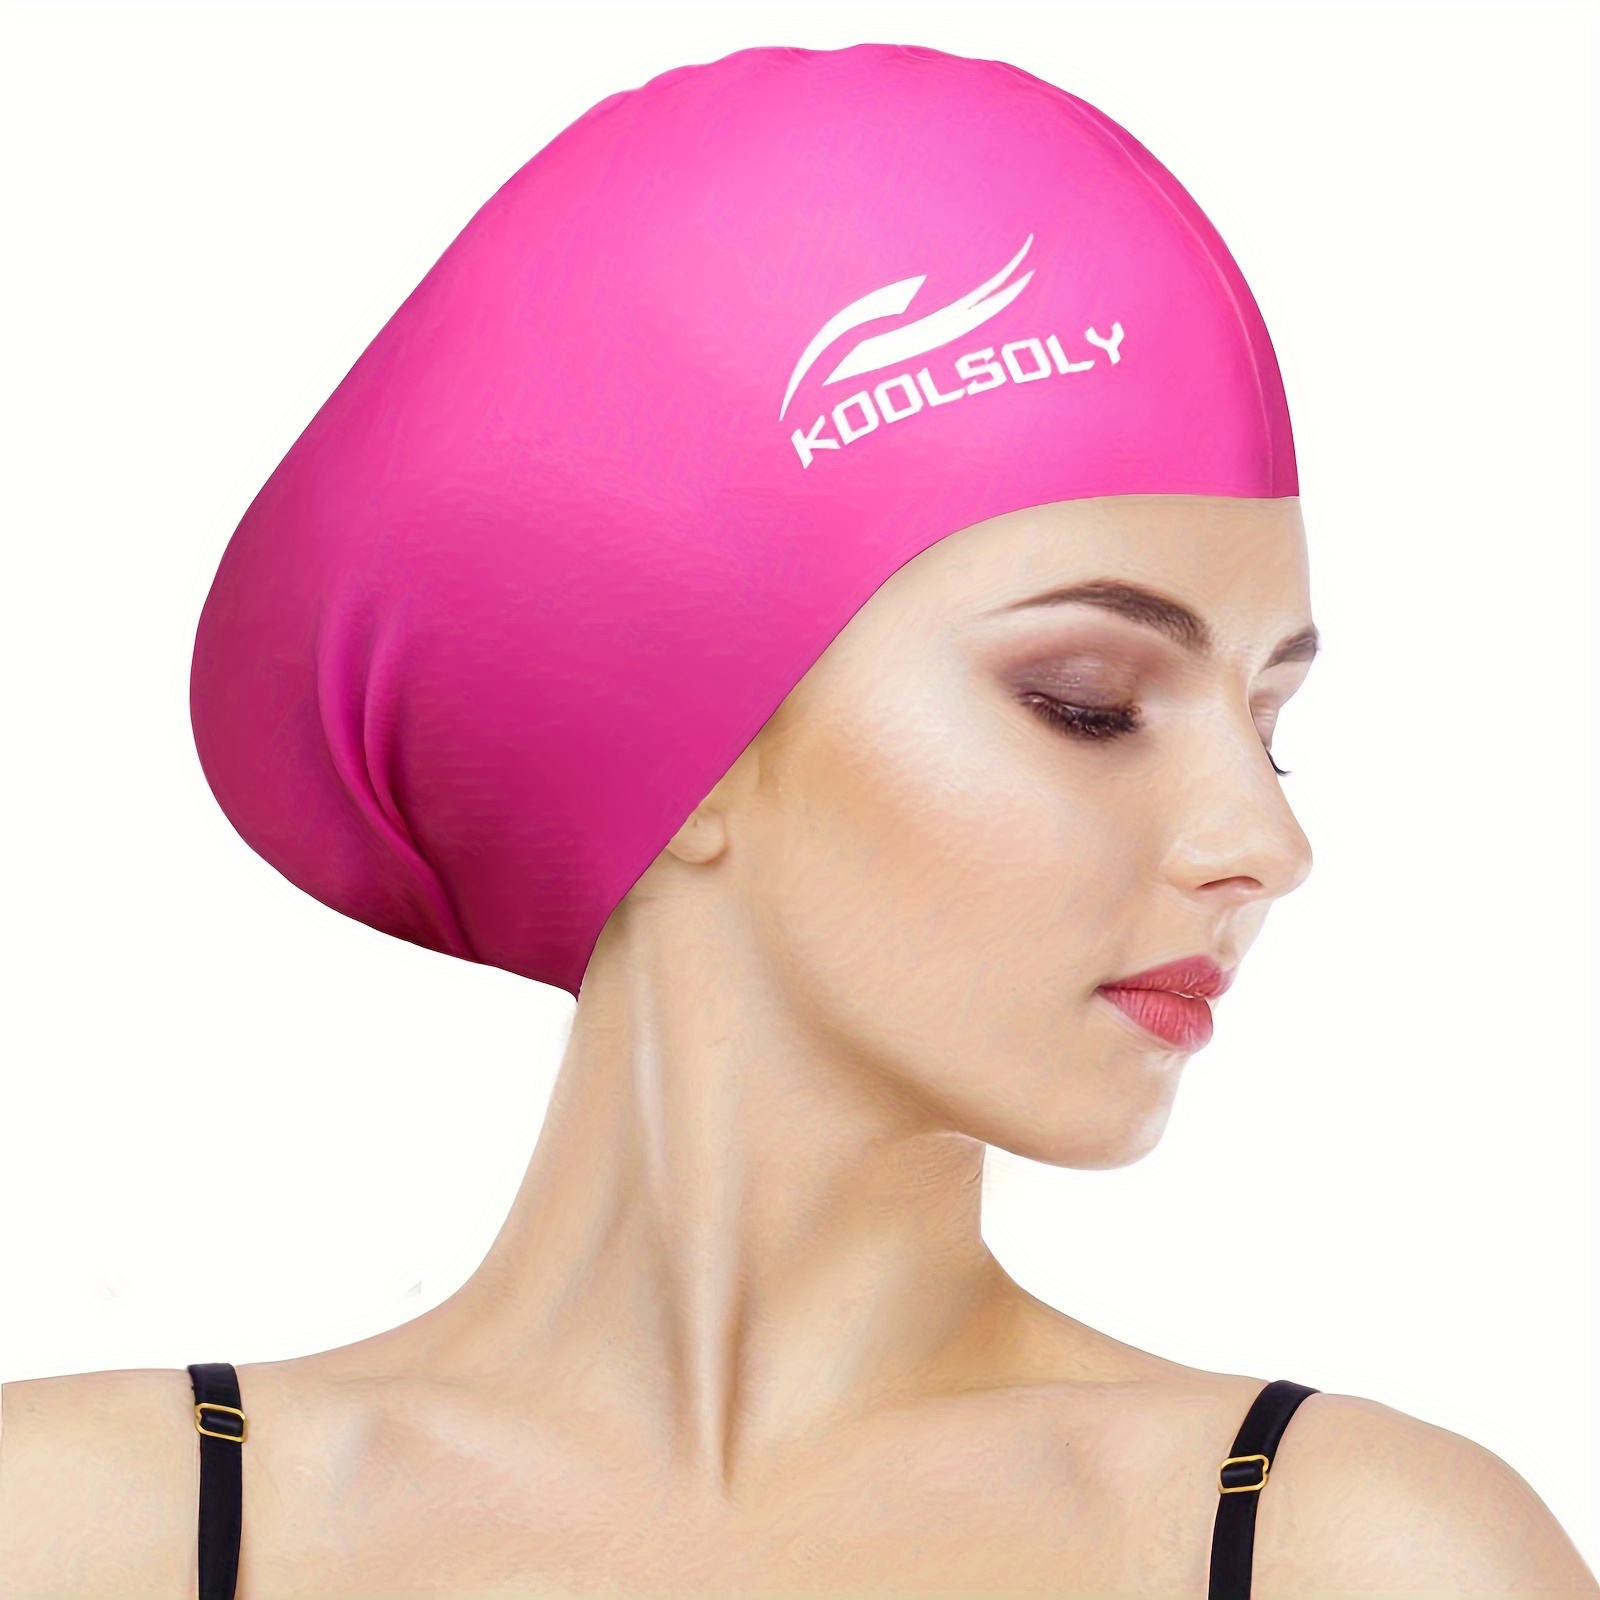 Silicone Swim Cap,Waterproof Swimming Cap with Silicone Nose Clip &  Earplugs Cover Ears